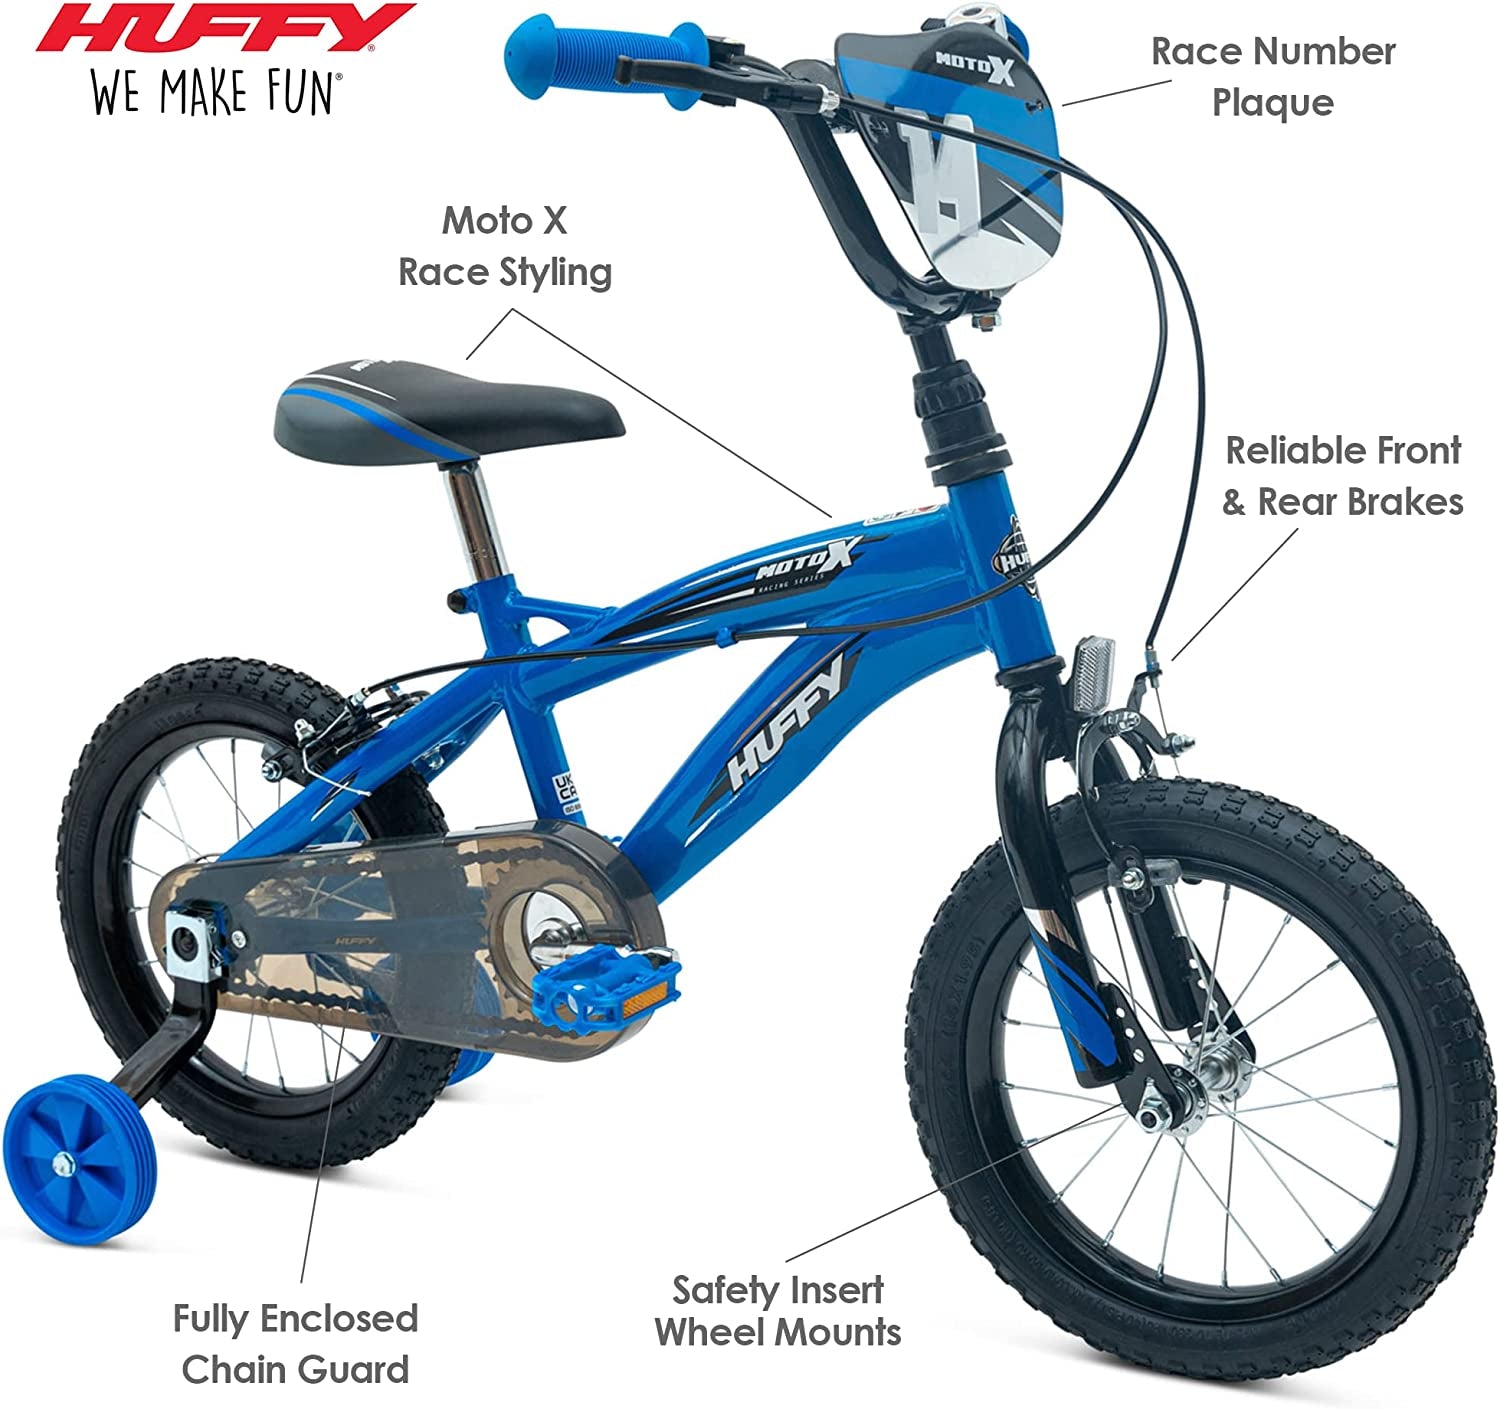 Moto X Boys Bike 12, 14, 16, 18 Inch Wheels Multiple Colours with BMX Styling